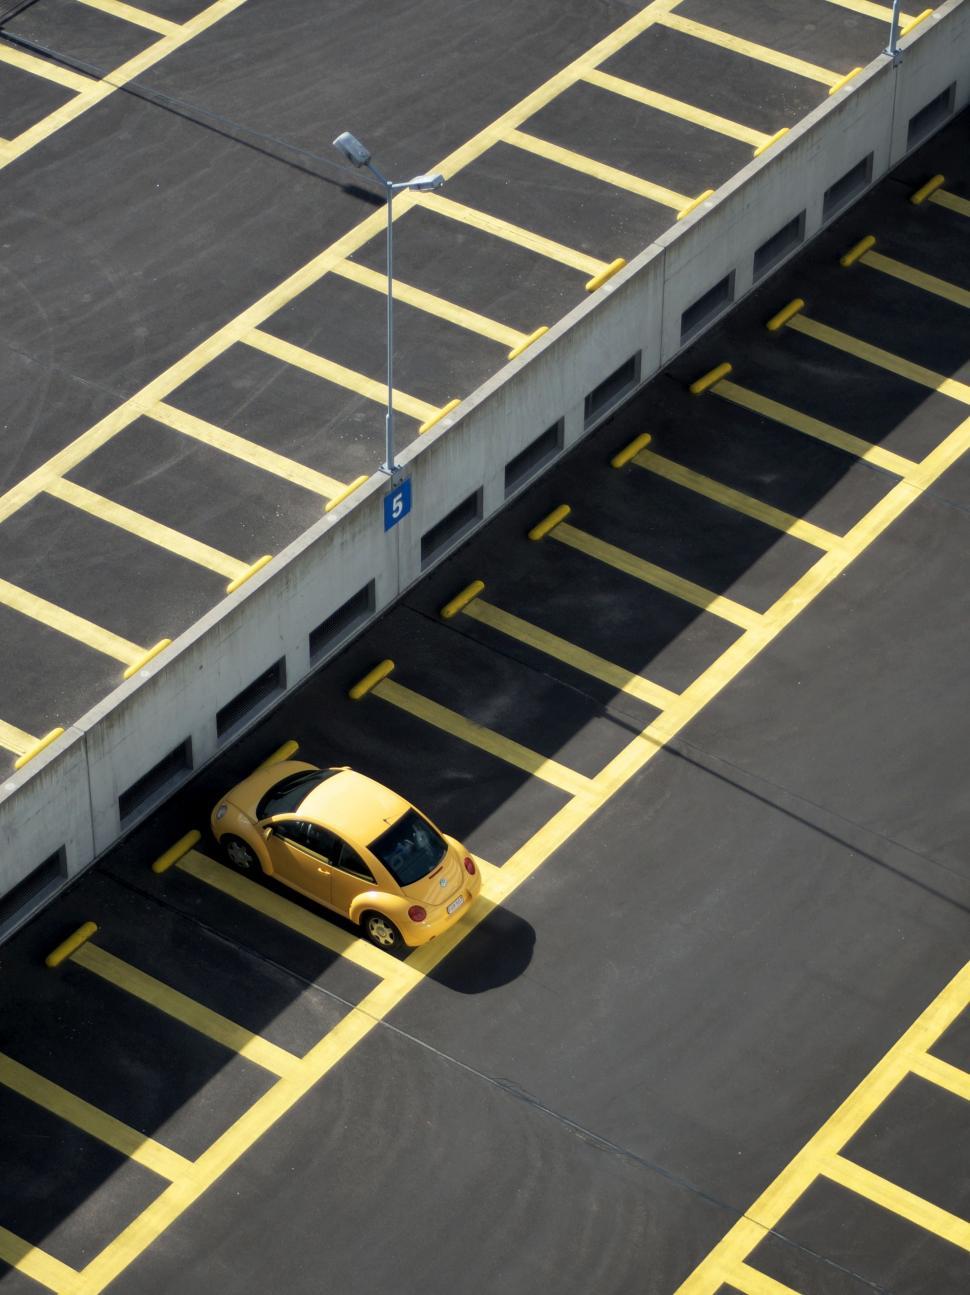 Free Image of Yellow Car Parked in Parking Lot 